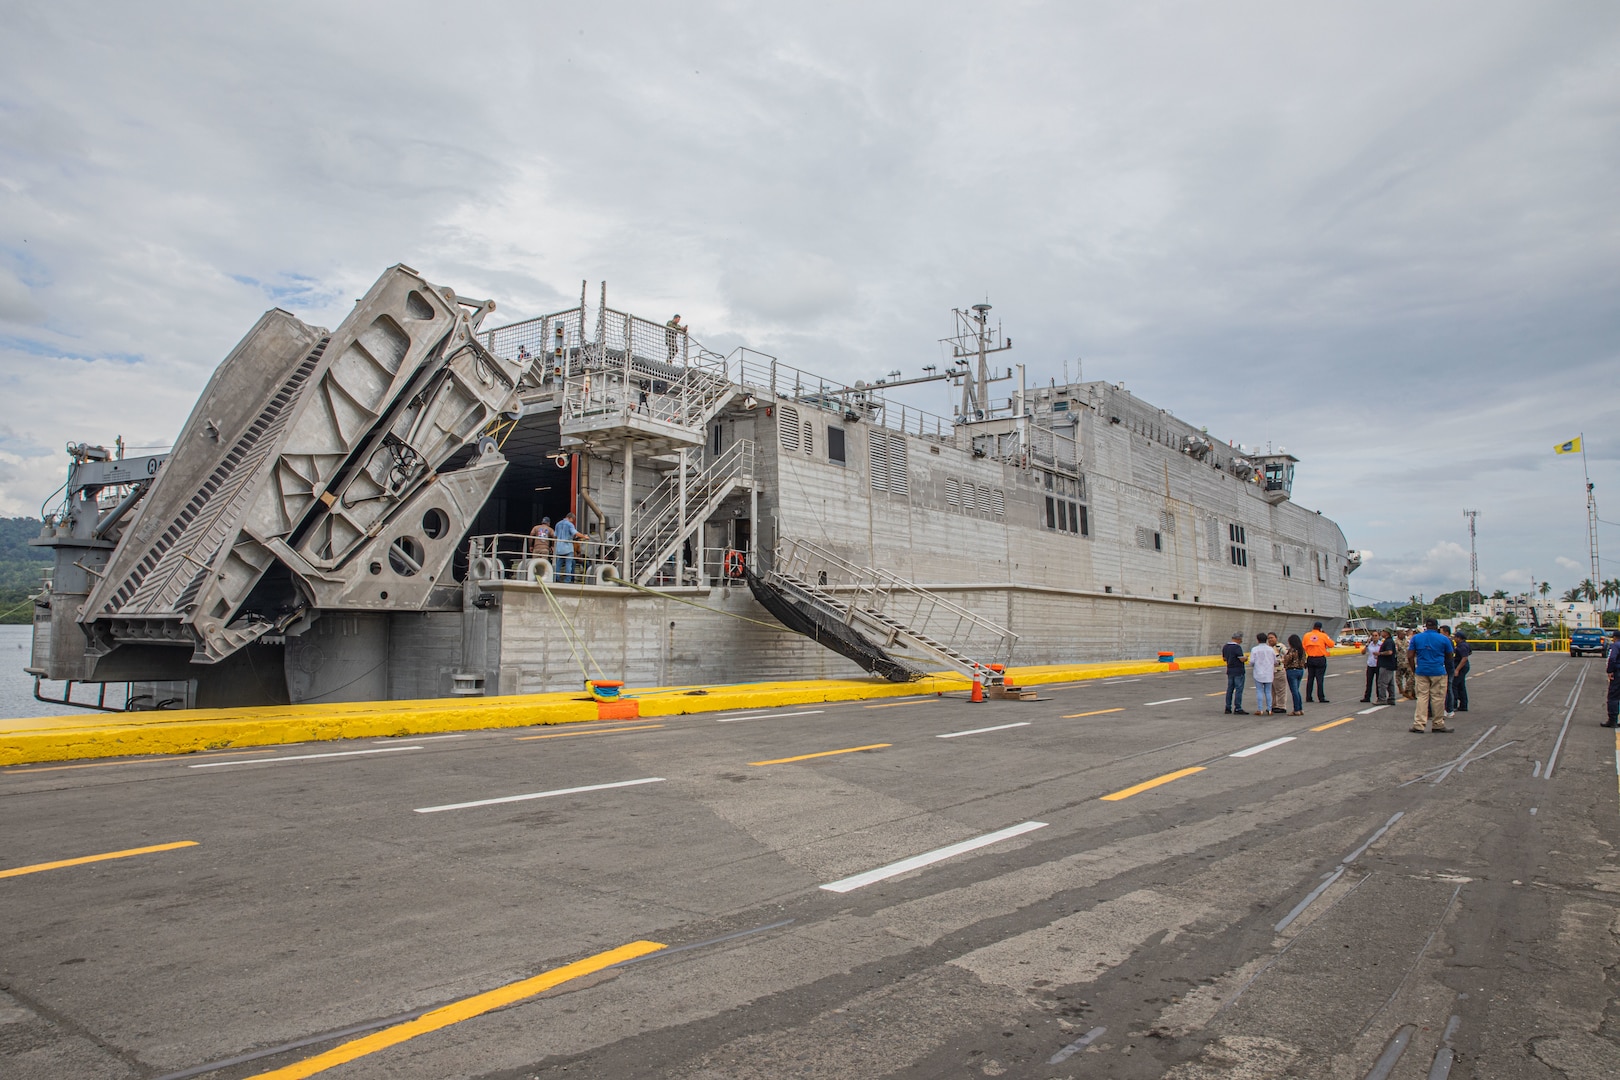 20230701-N-EA586-1012 ALMIRANTE, PANAMA (July 2, 2023) Expeditionary fast transport USNS Burlington (T-EFP 10) arrives in Almirante, Panama, August 11, 2023.  The U.S. Navy expeditionary fast transport USNS Burlington (T-EPF 10) is on deployment to the U.S. Southern Command area of operations over the next two months as part of U.S. Naval Forces Southern Command /U.S. 4th Fleet's Continuing Promise 2023 mission.(U.S. Navy photo by MC2 Conner Foy)